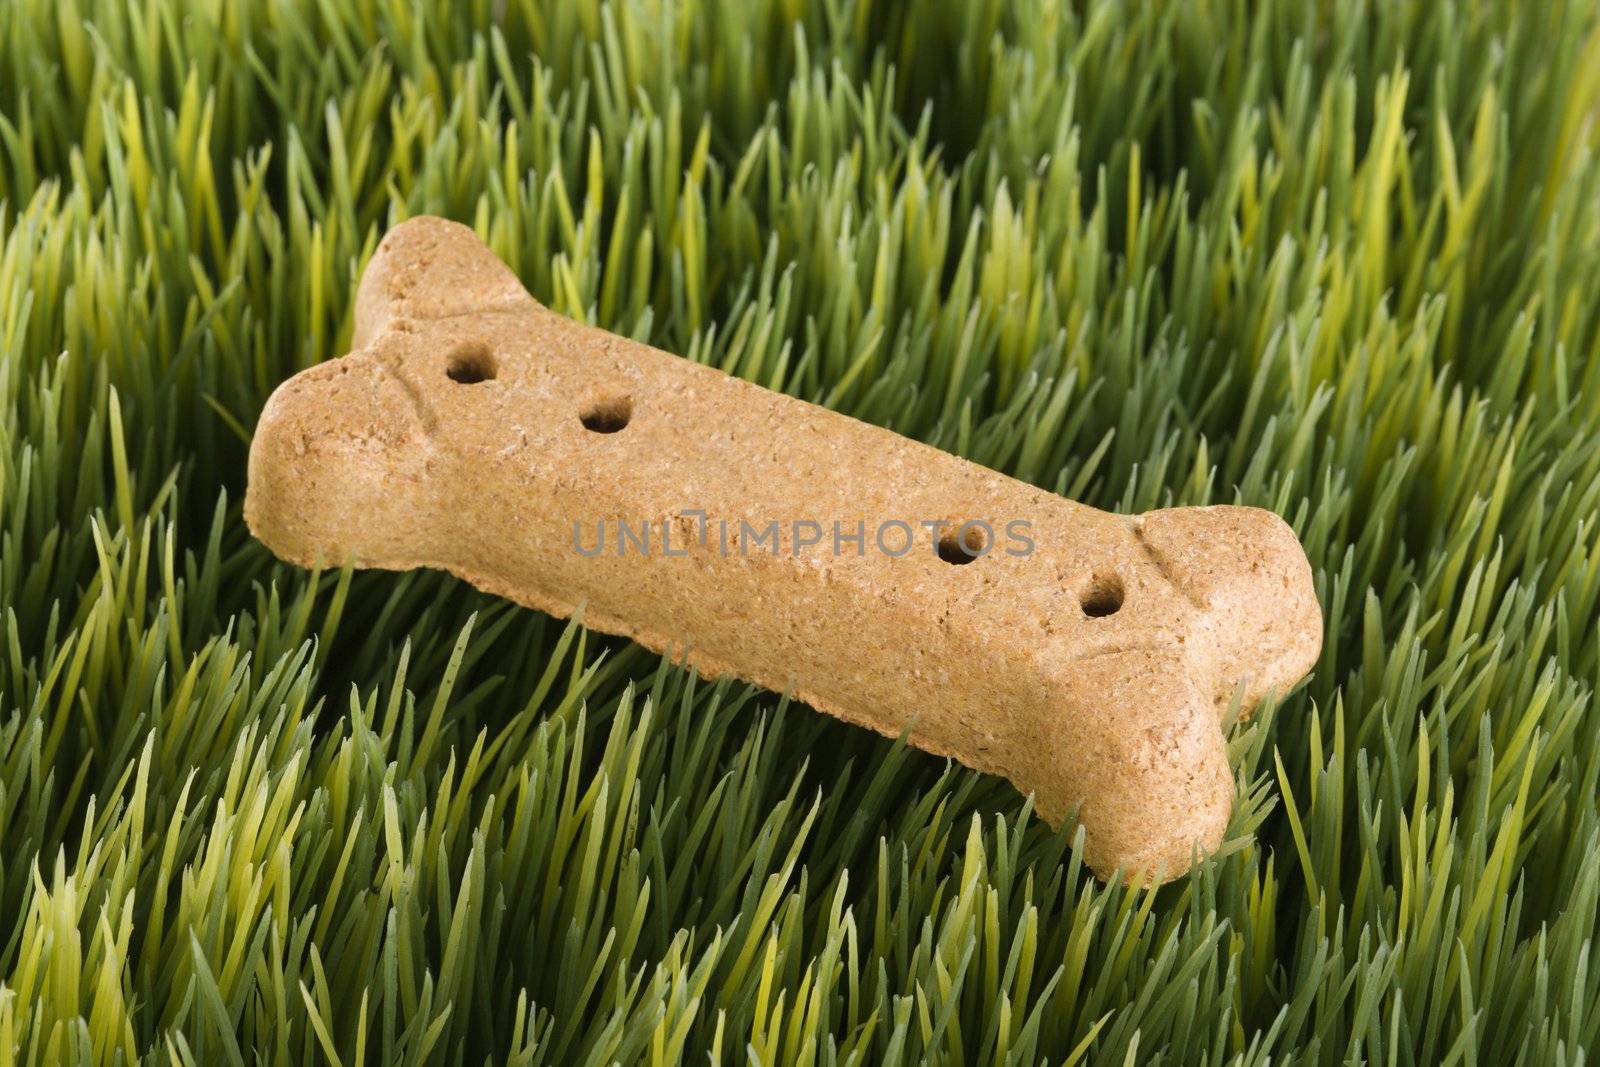 Studio shot of a dog treat laying in grass.